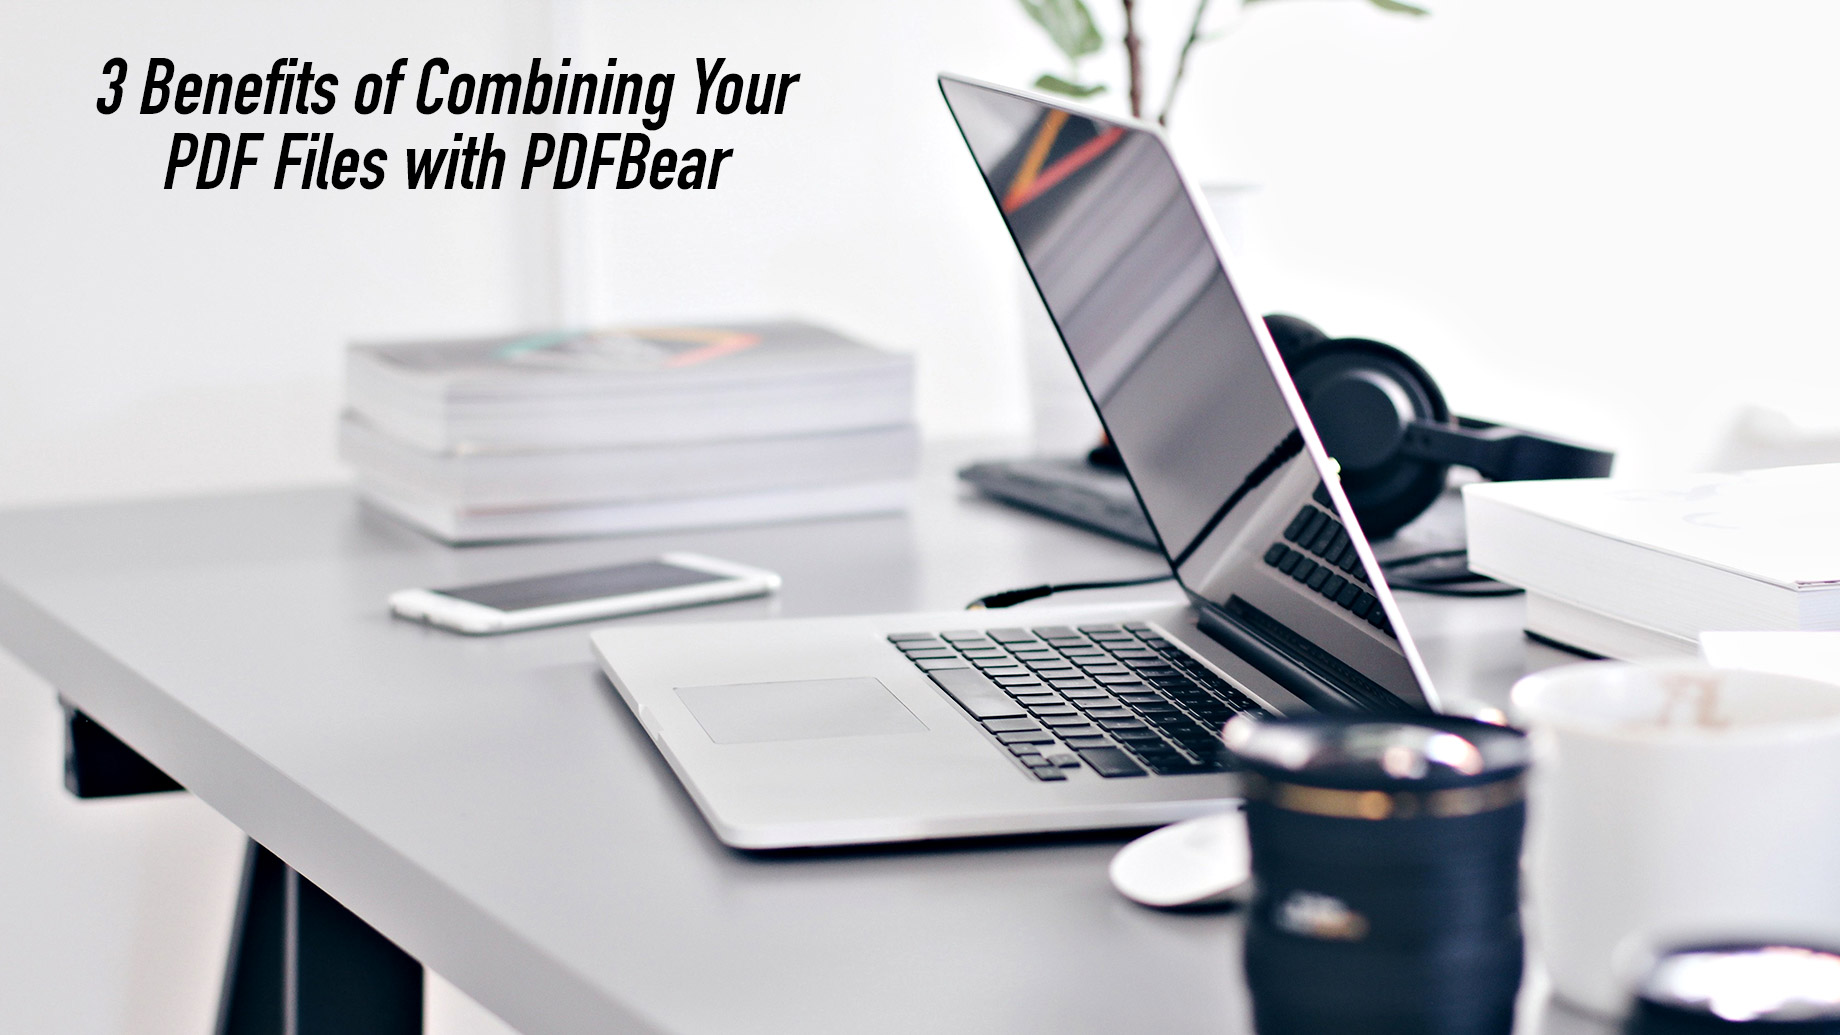 PDFBear Features and Advantages